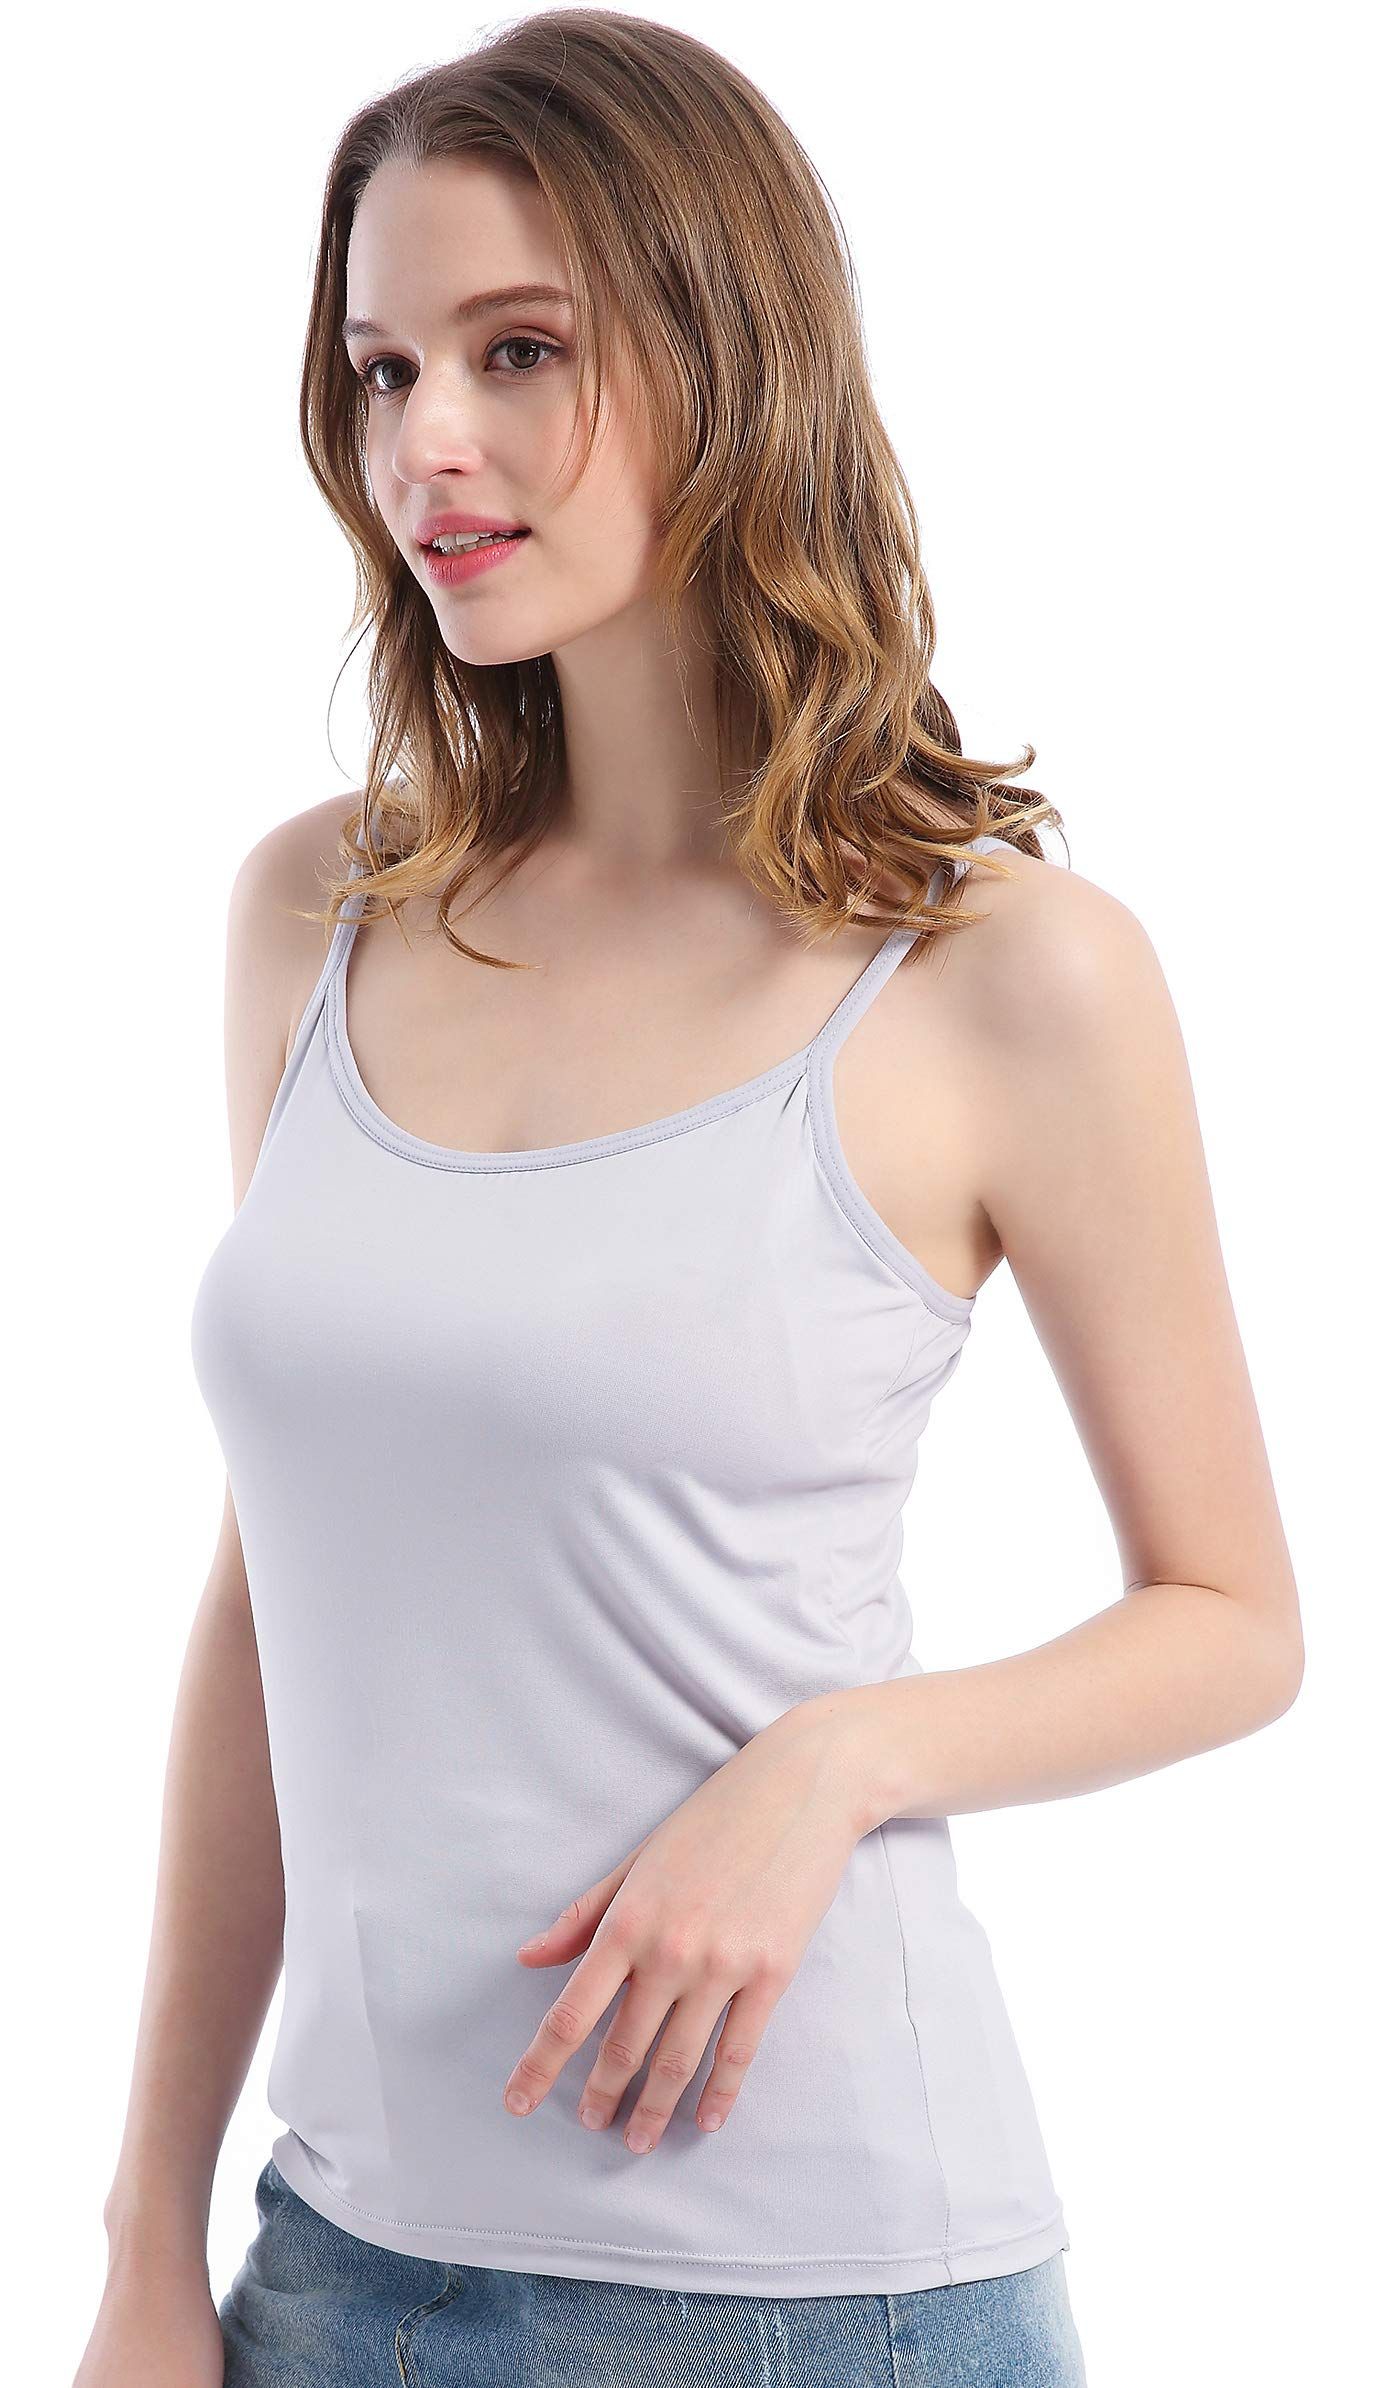 Camisole Bra: Comfortable and Chic Lingerie Option